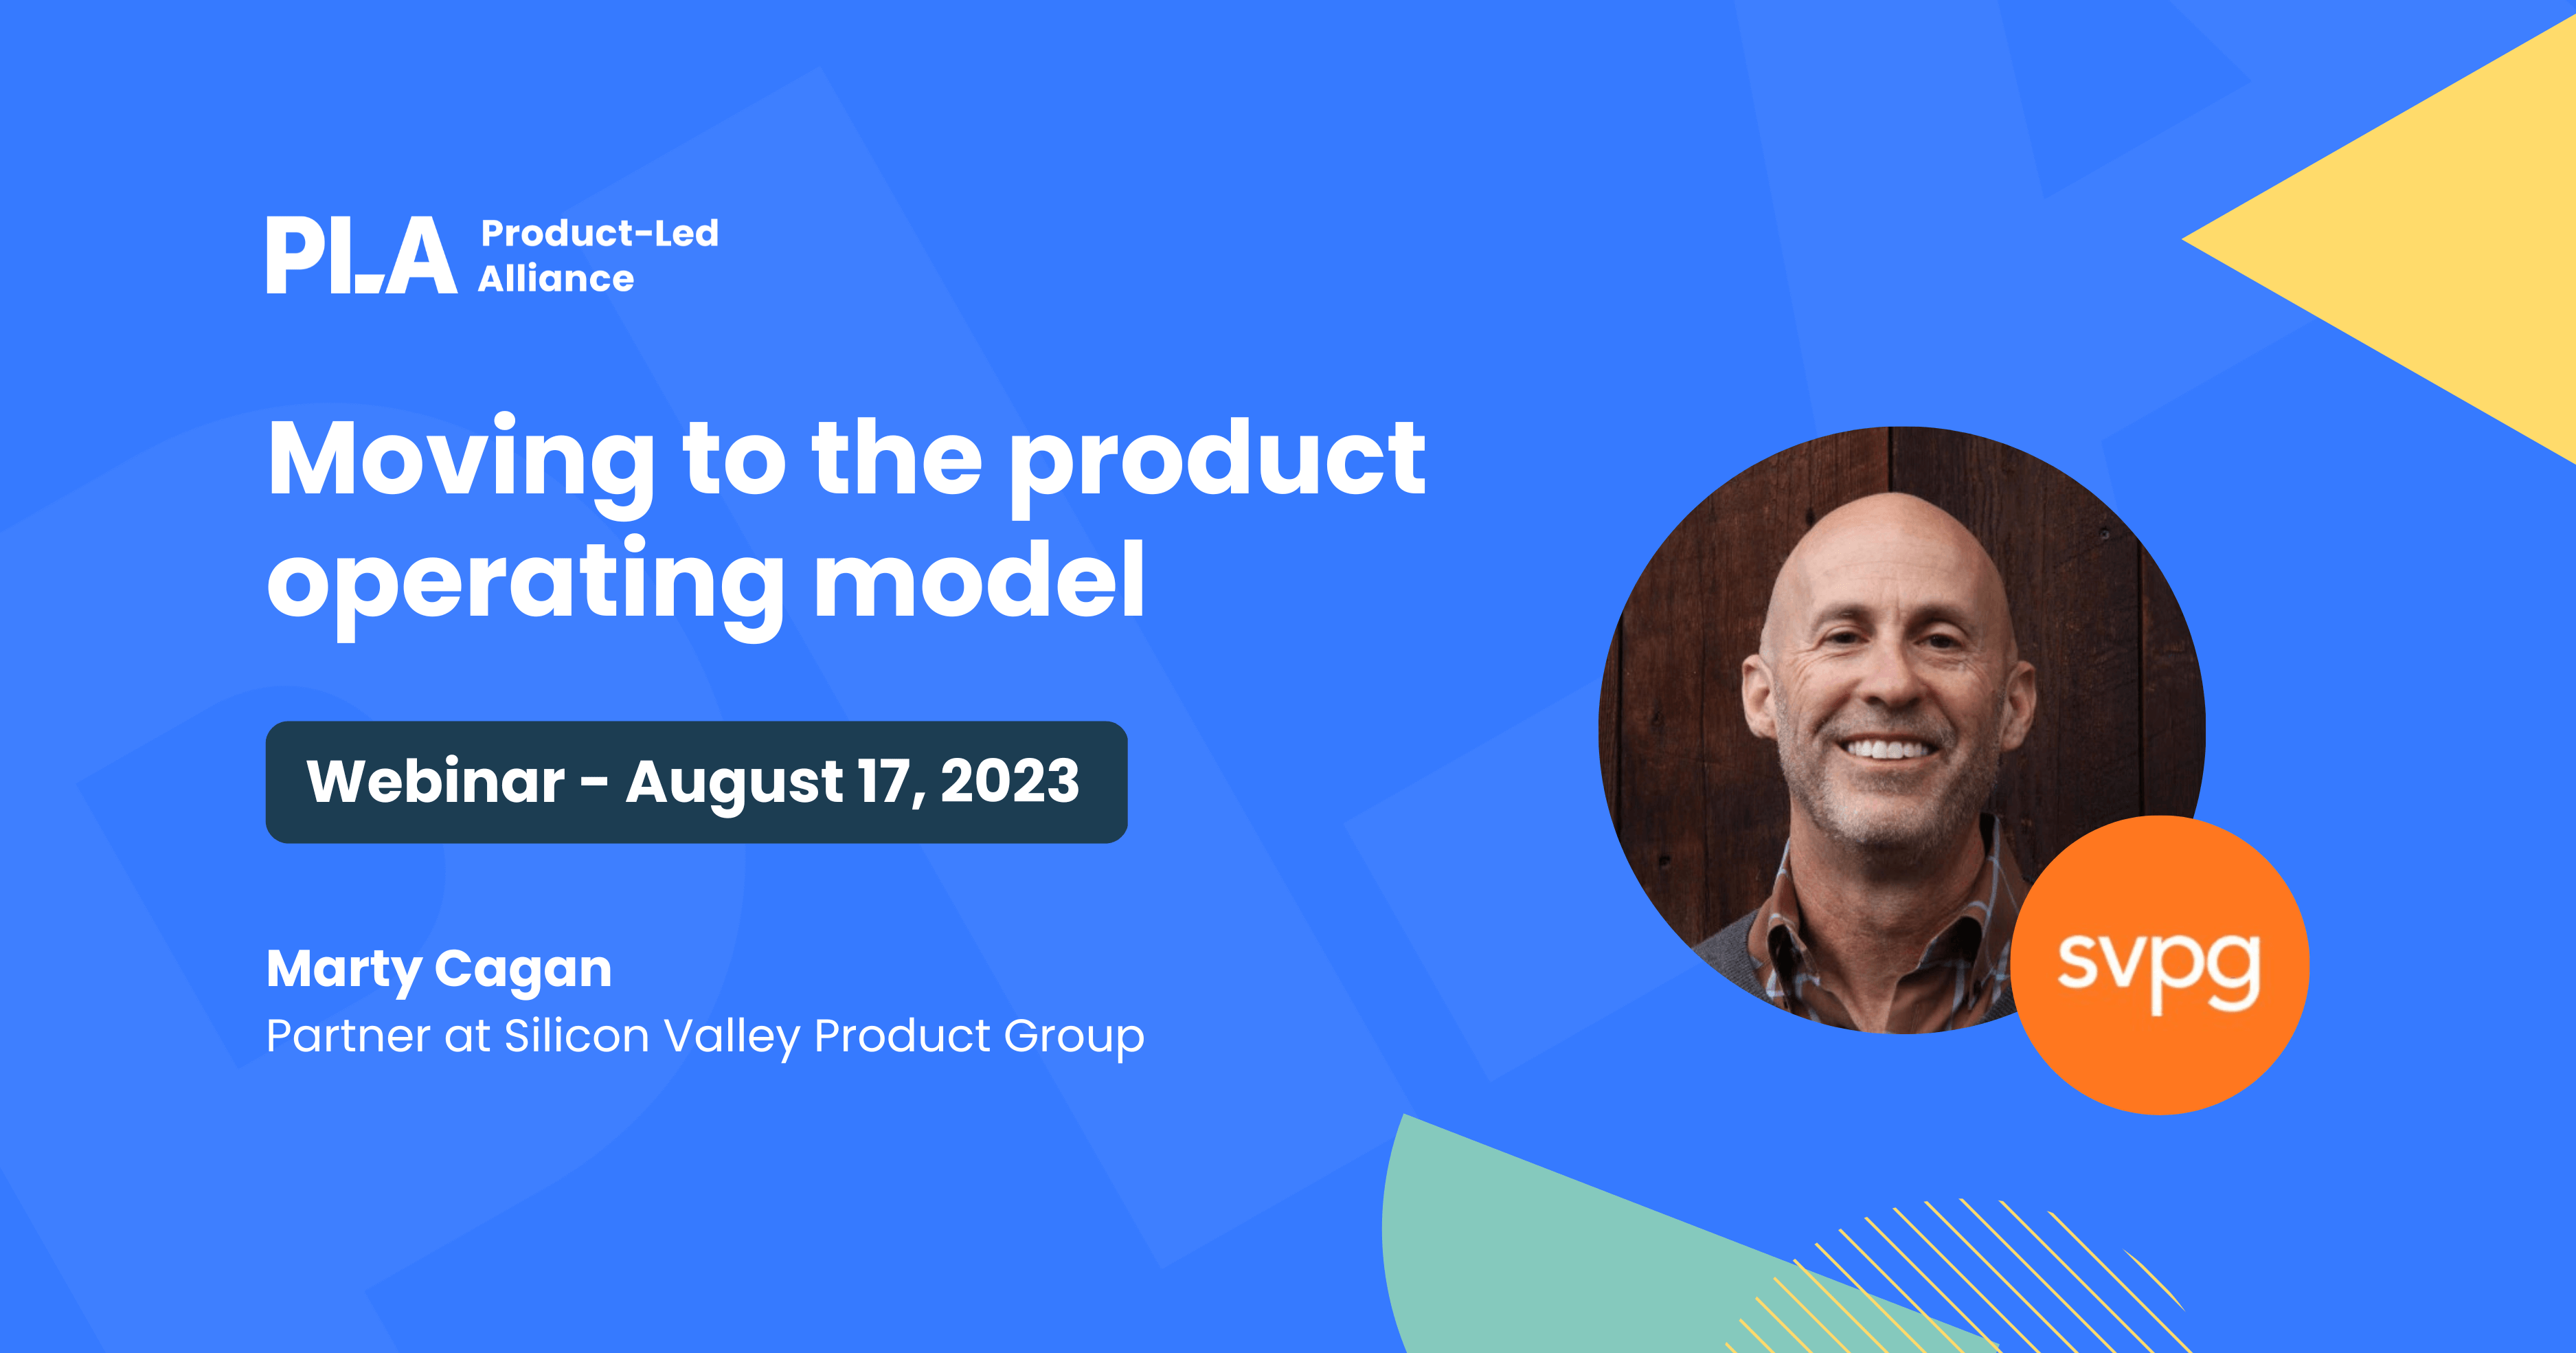  moving to the product operating model 